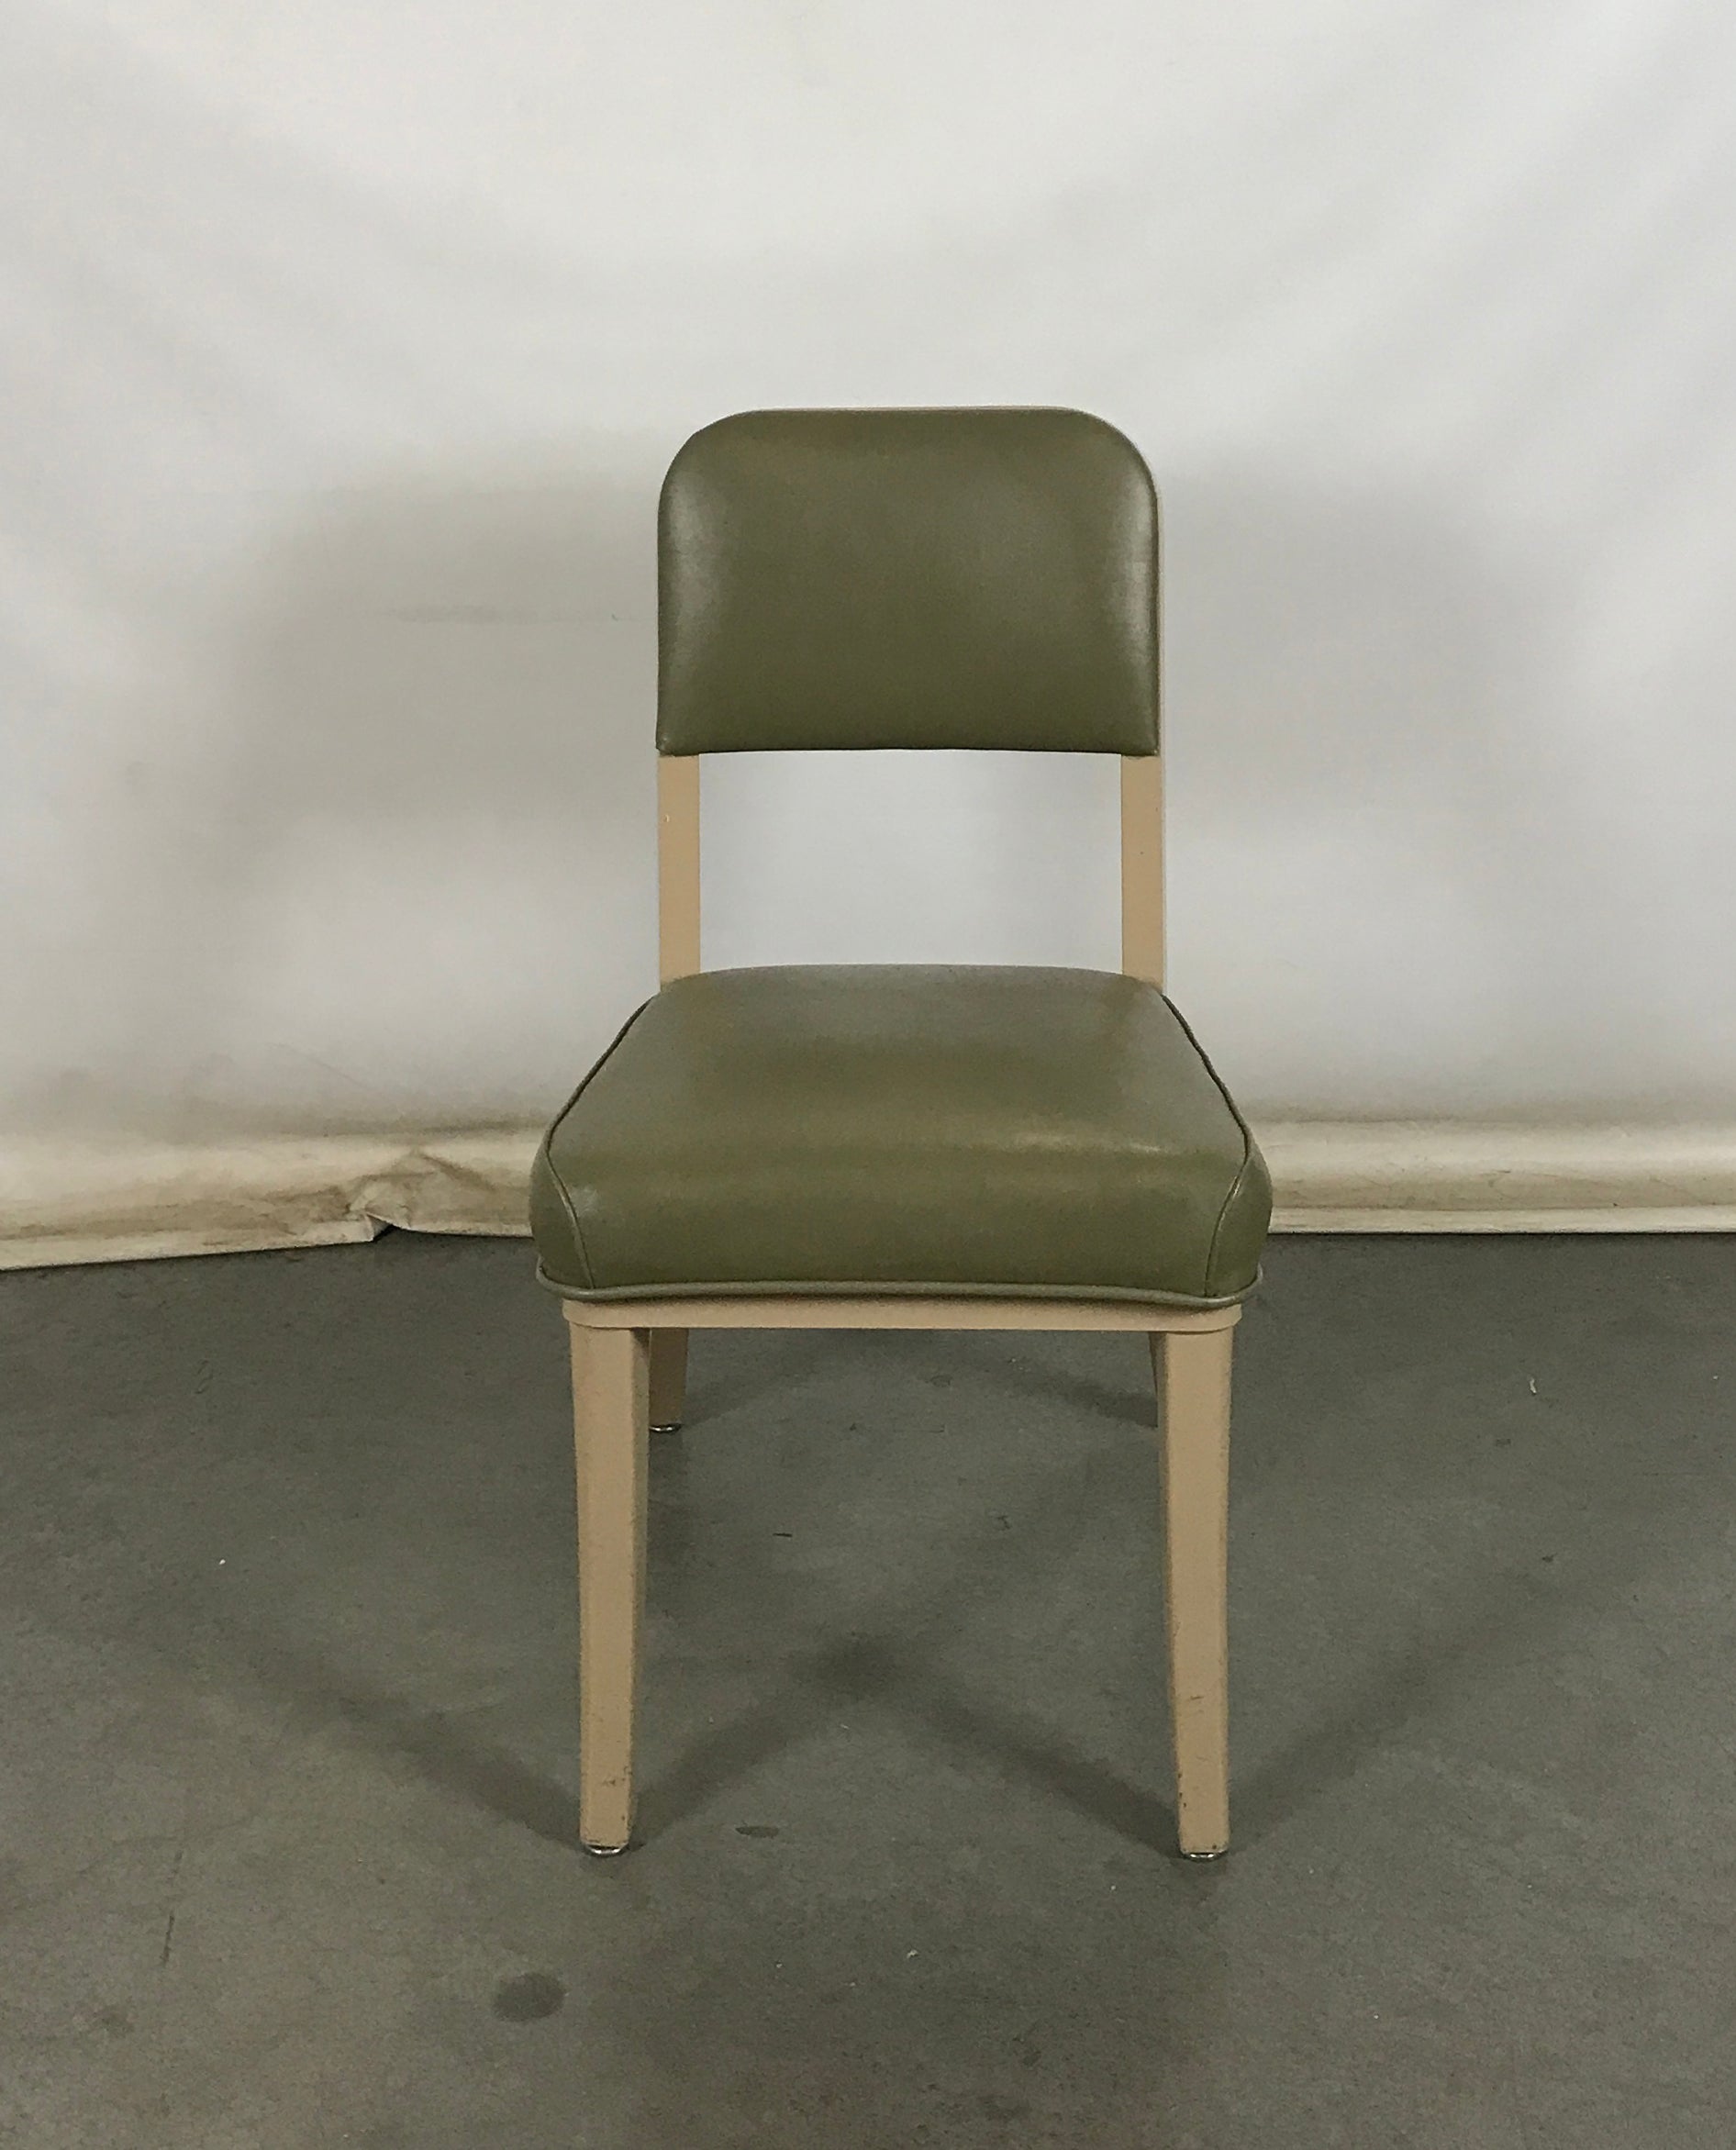 Steelcase Green and Tan Chair